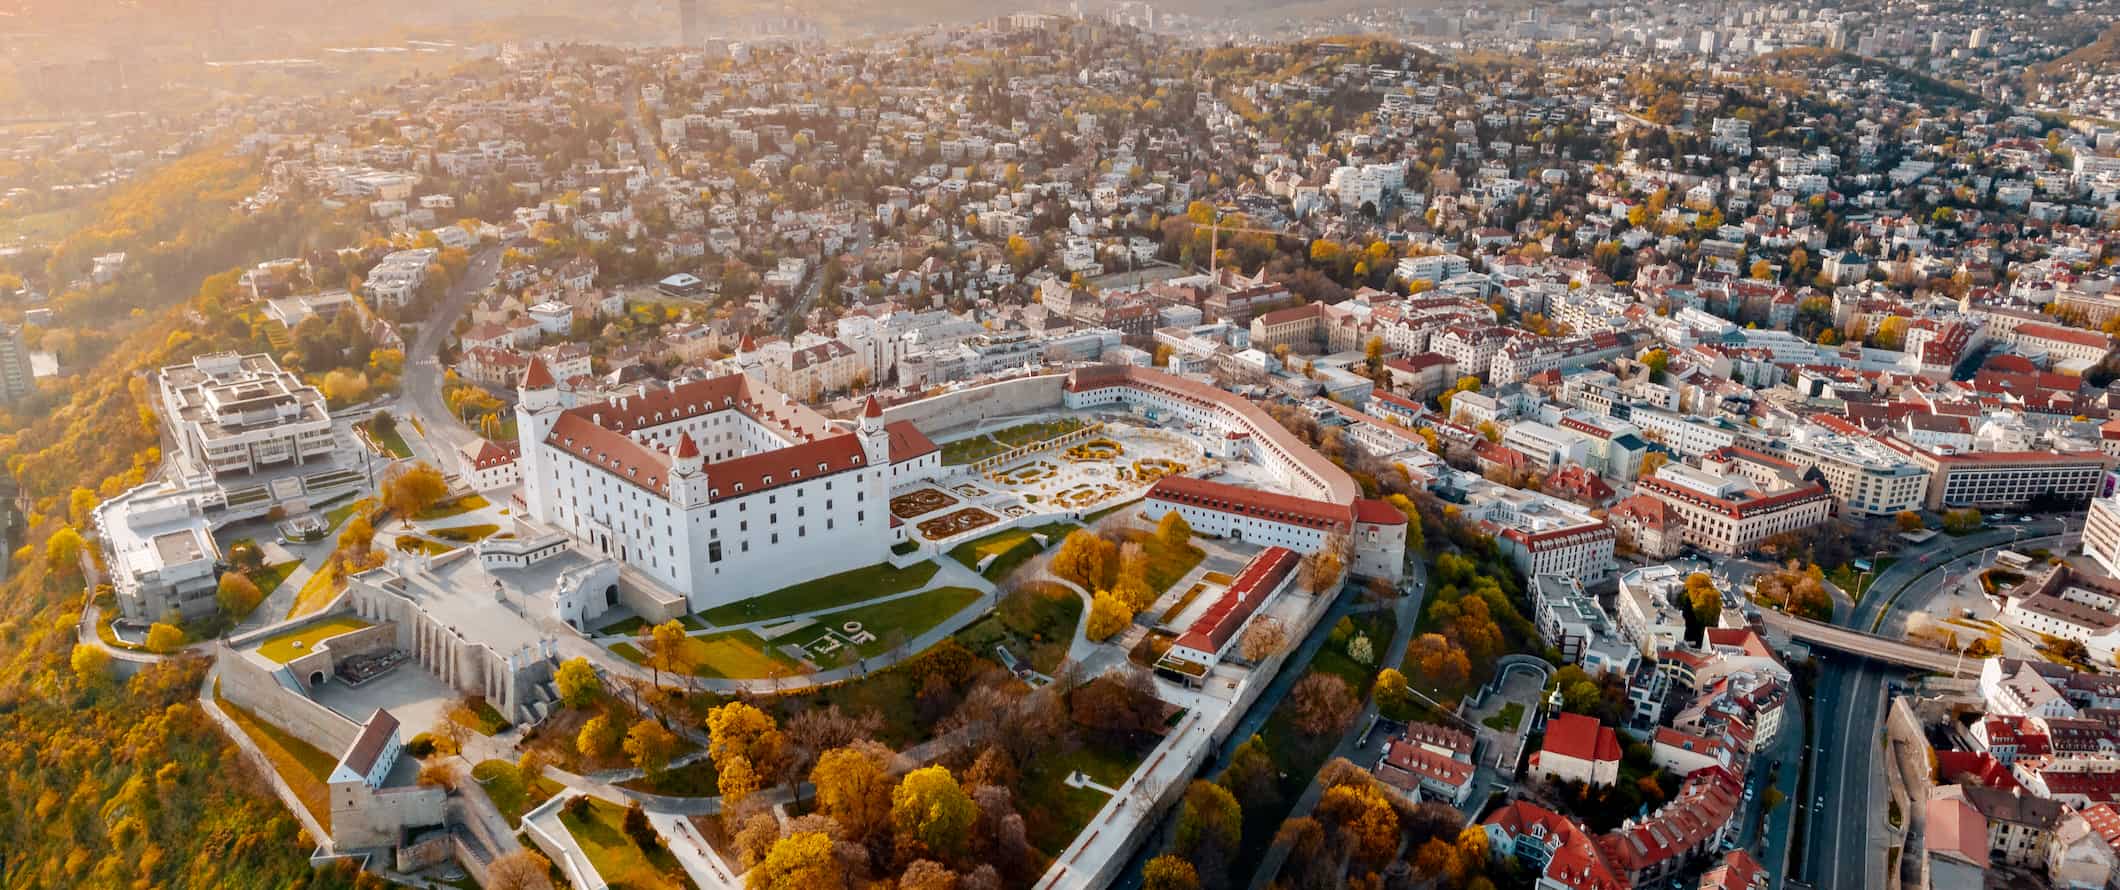 An aerial view of Bratislava, the capital of Slovakia, featuring historic buildings and plenty of greenery